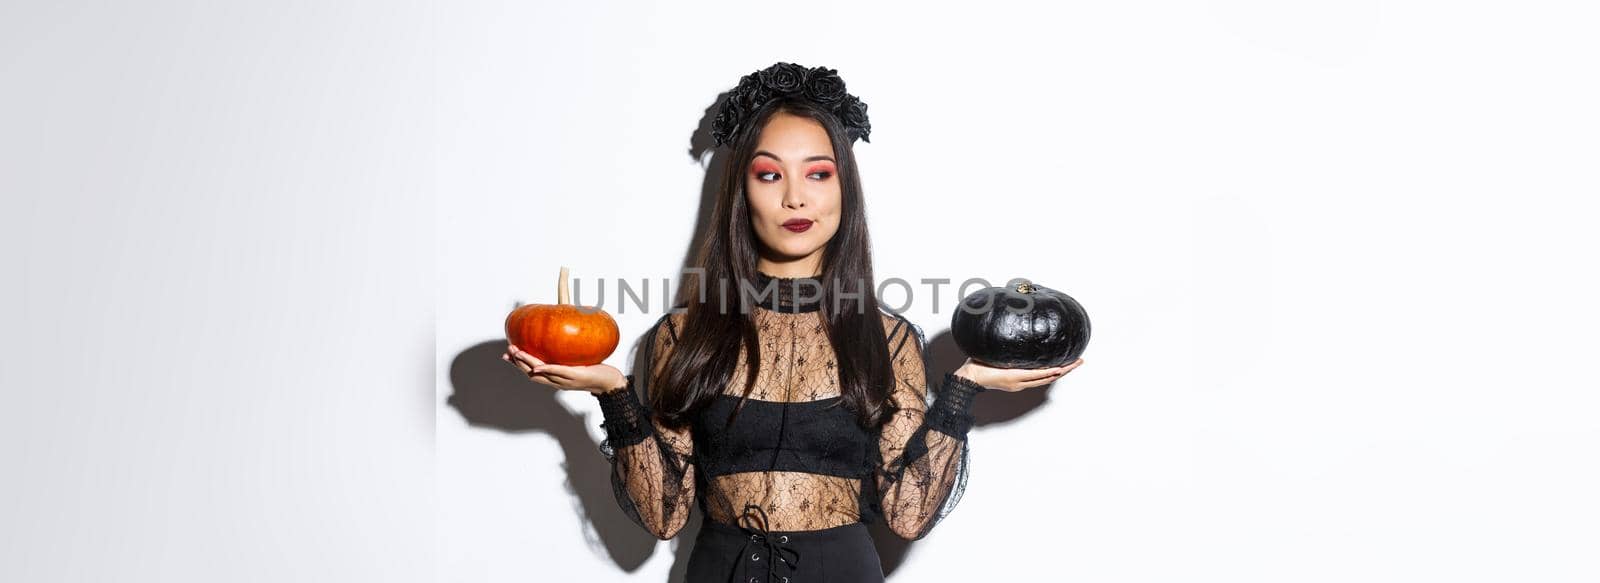 Thoughtful stylish woman in witch costume, picking pumpkin for halloween, making decision while standing over white background.